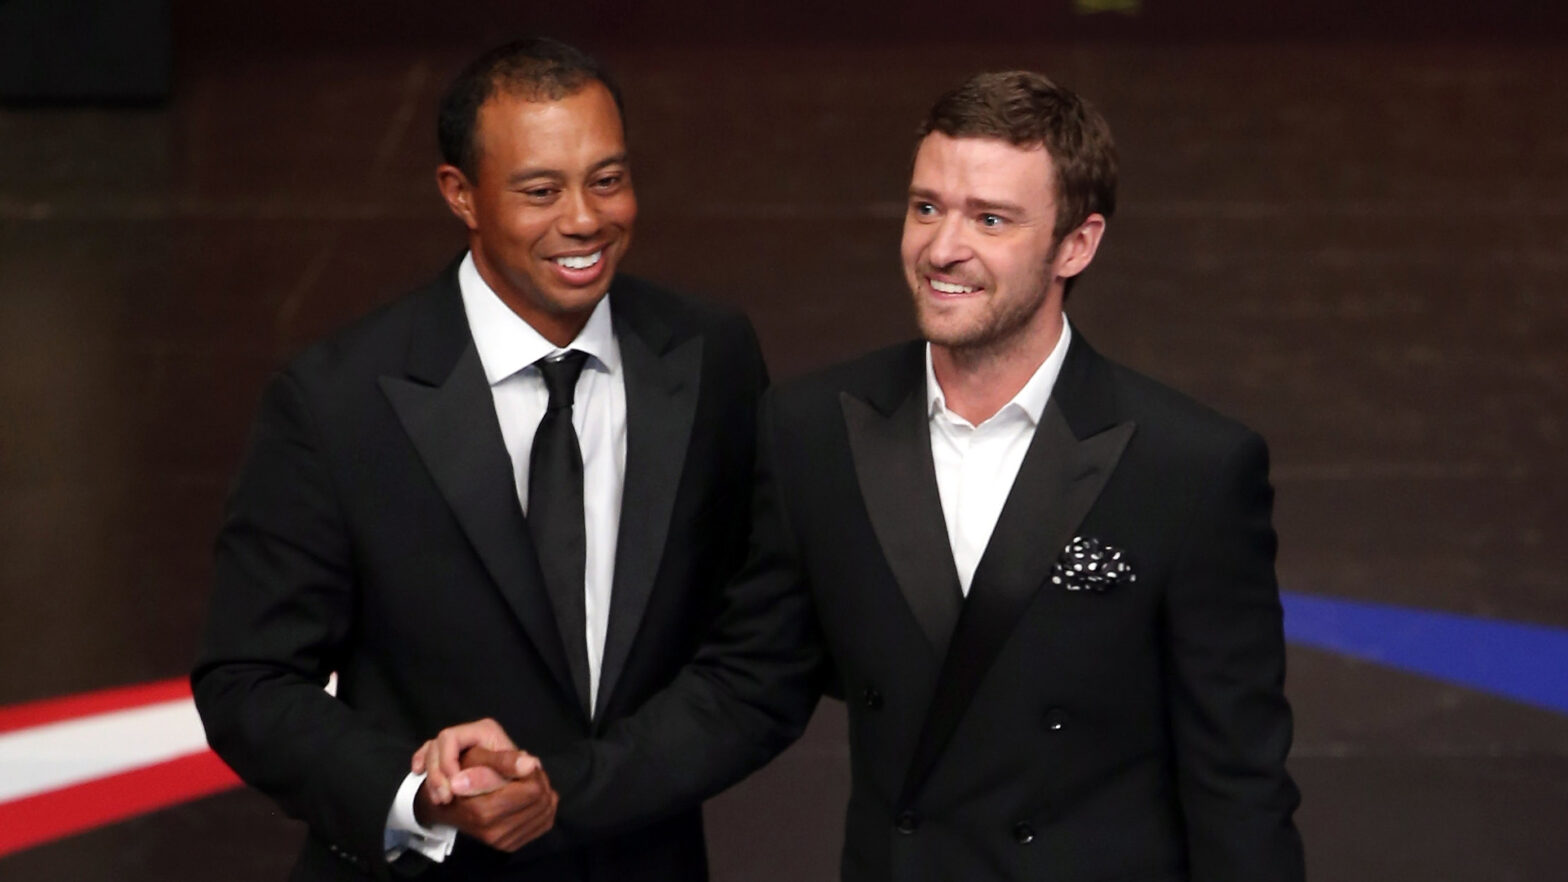 Tiger Woods And Justin Timberlake Open An Entertainment Sports Bar Together In New York